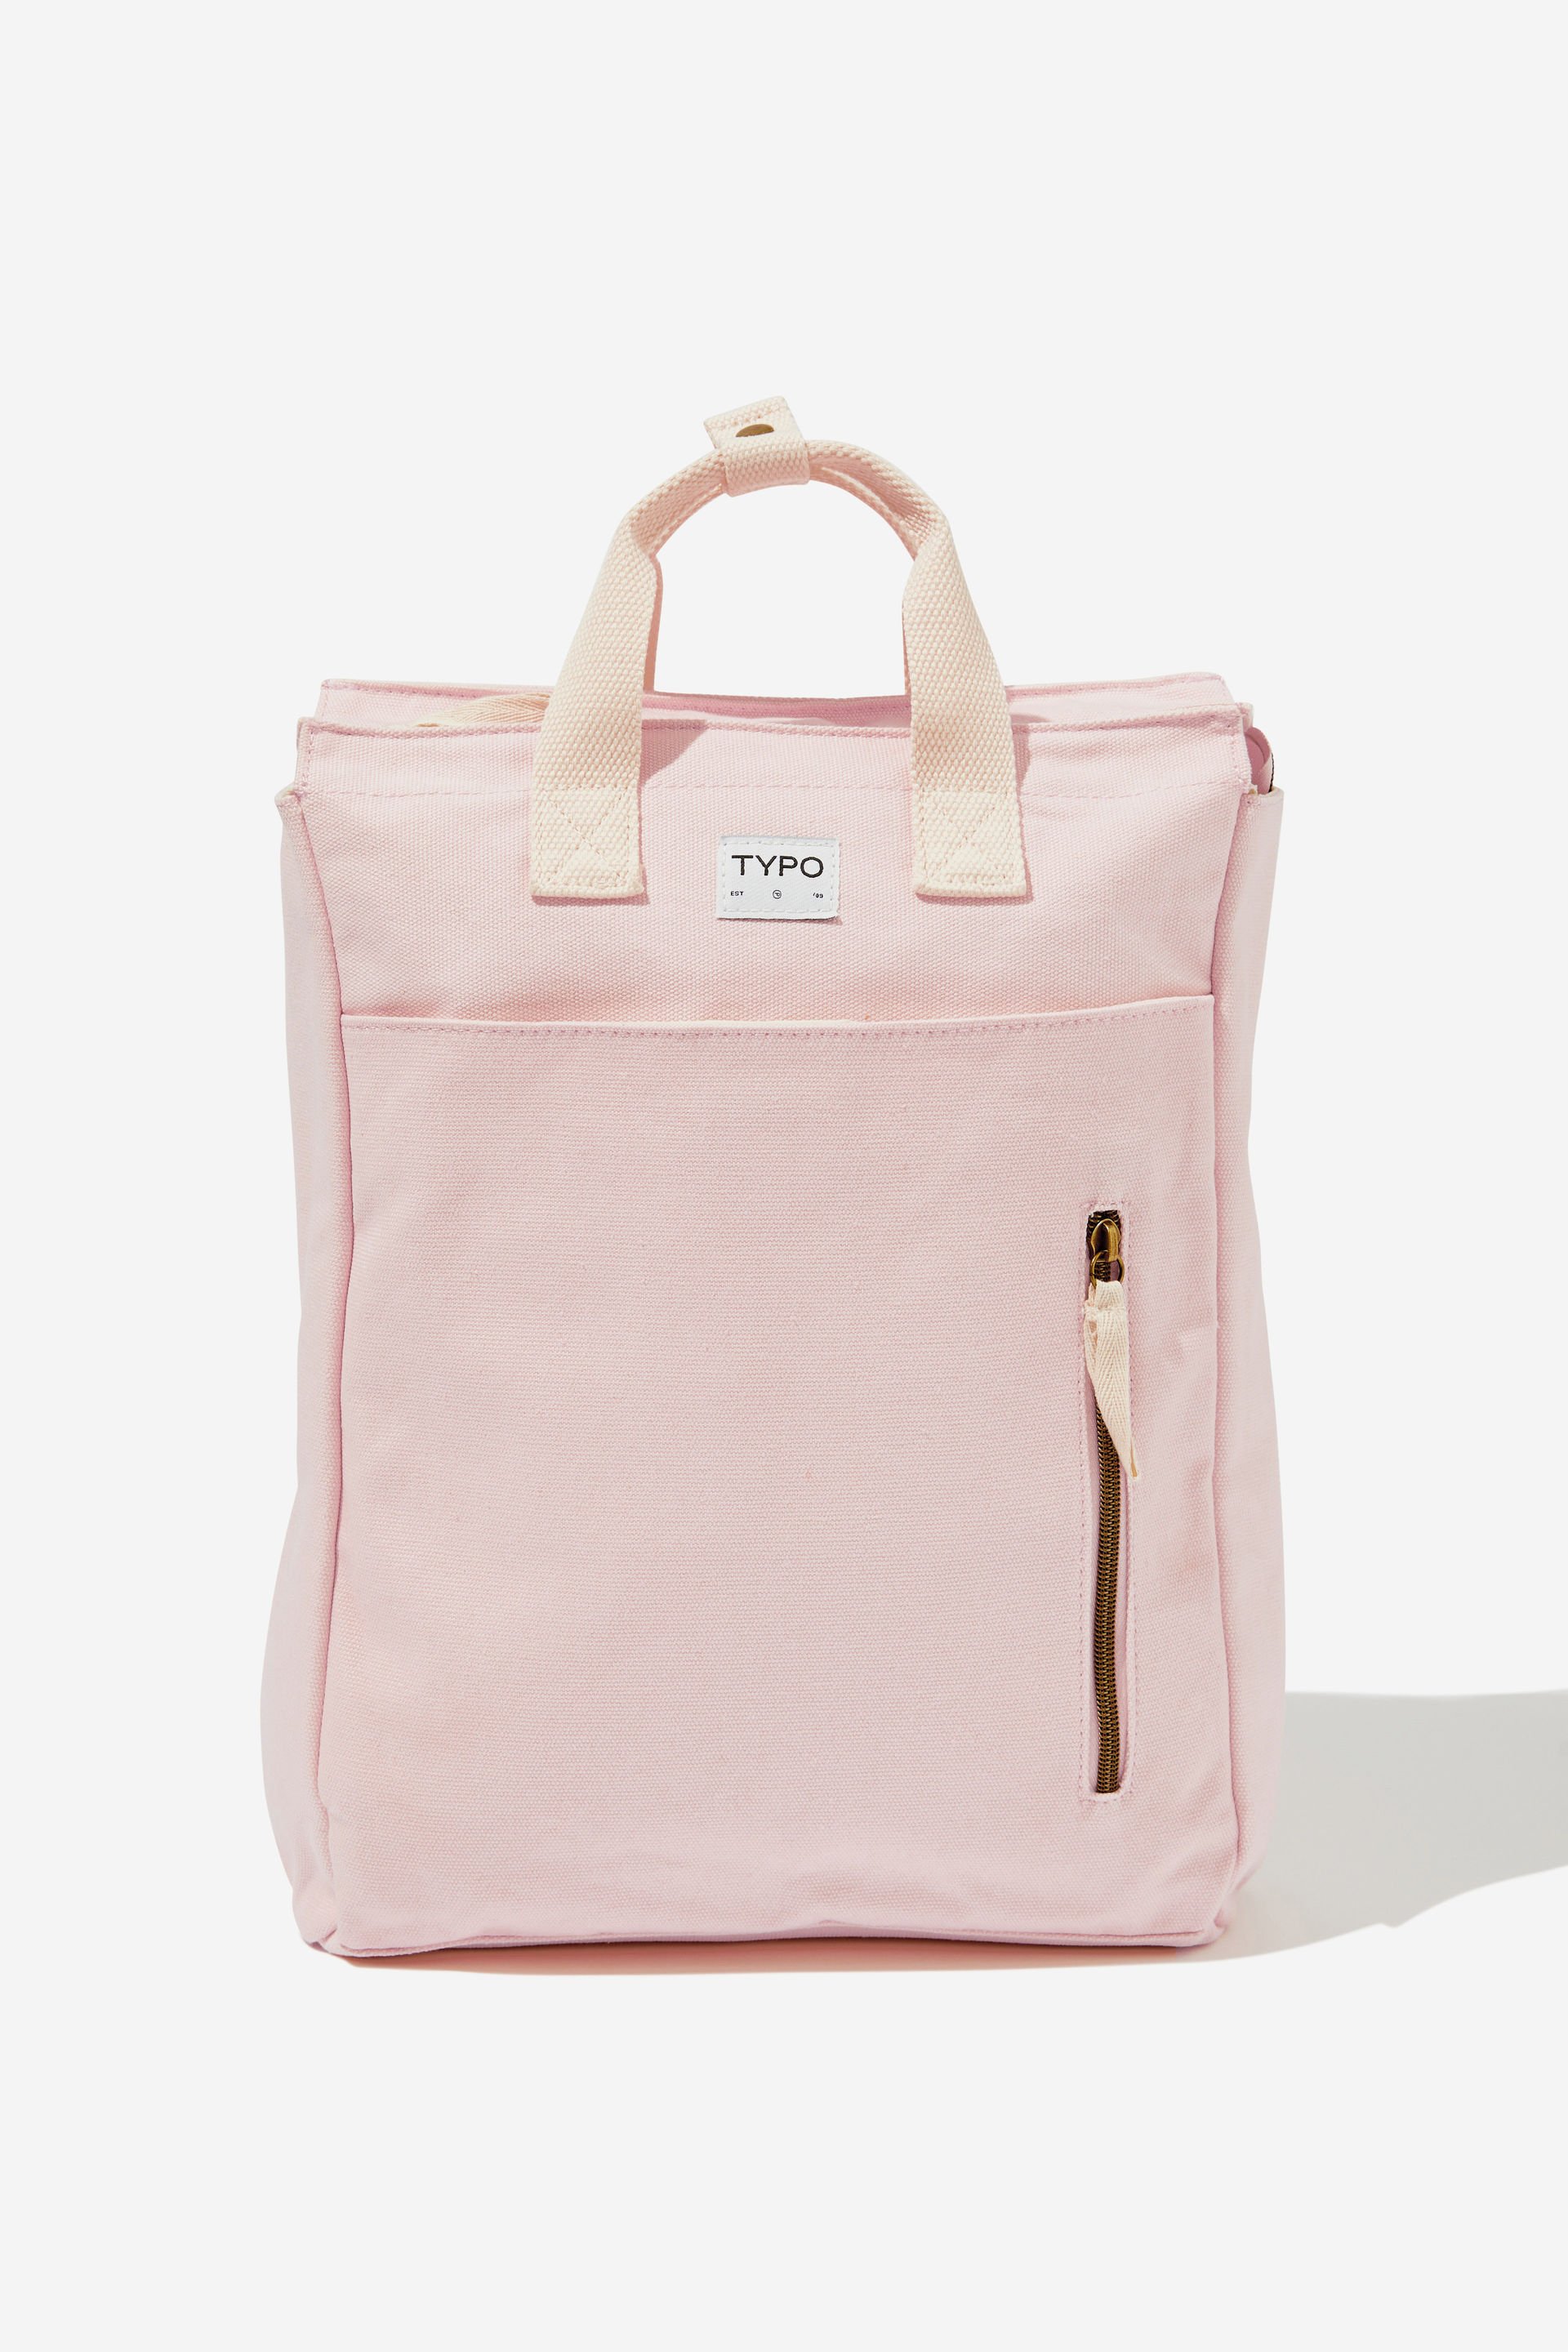 Typo - Got Your Back Tote Backpack - Ballet blush